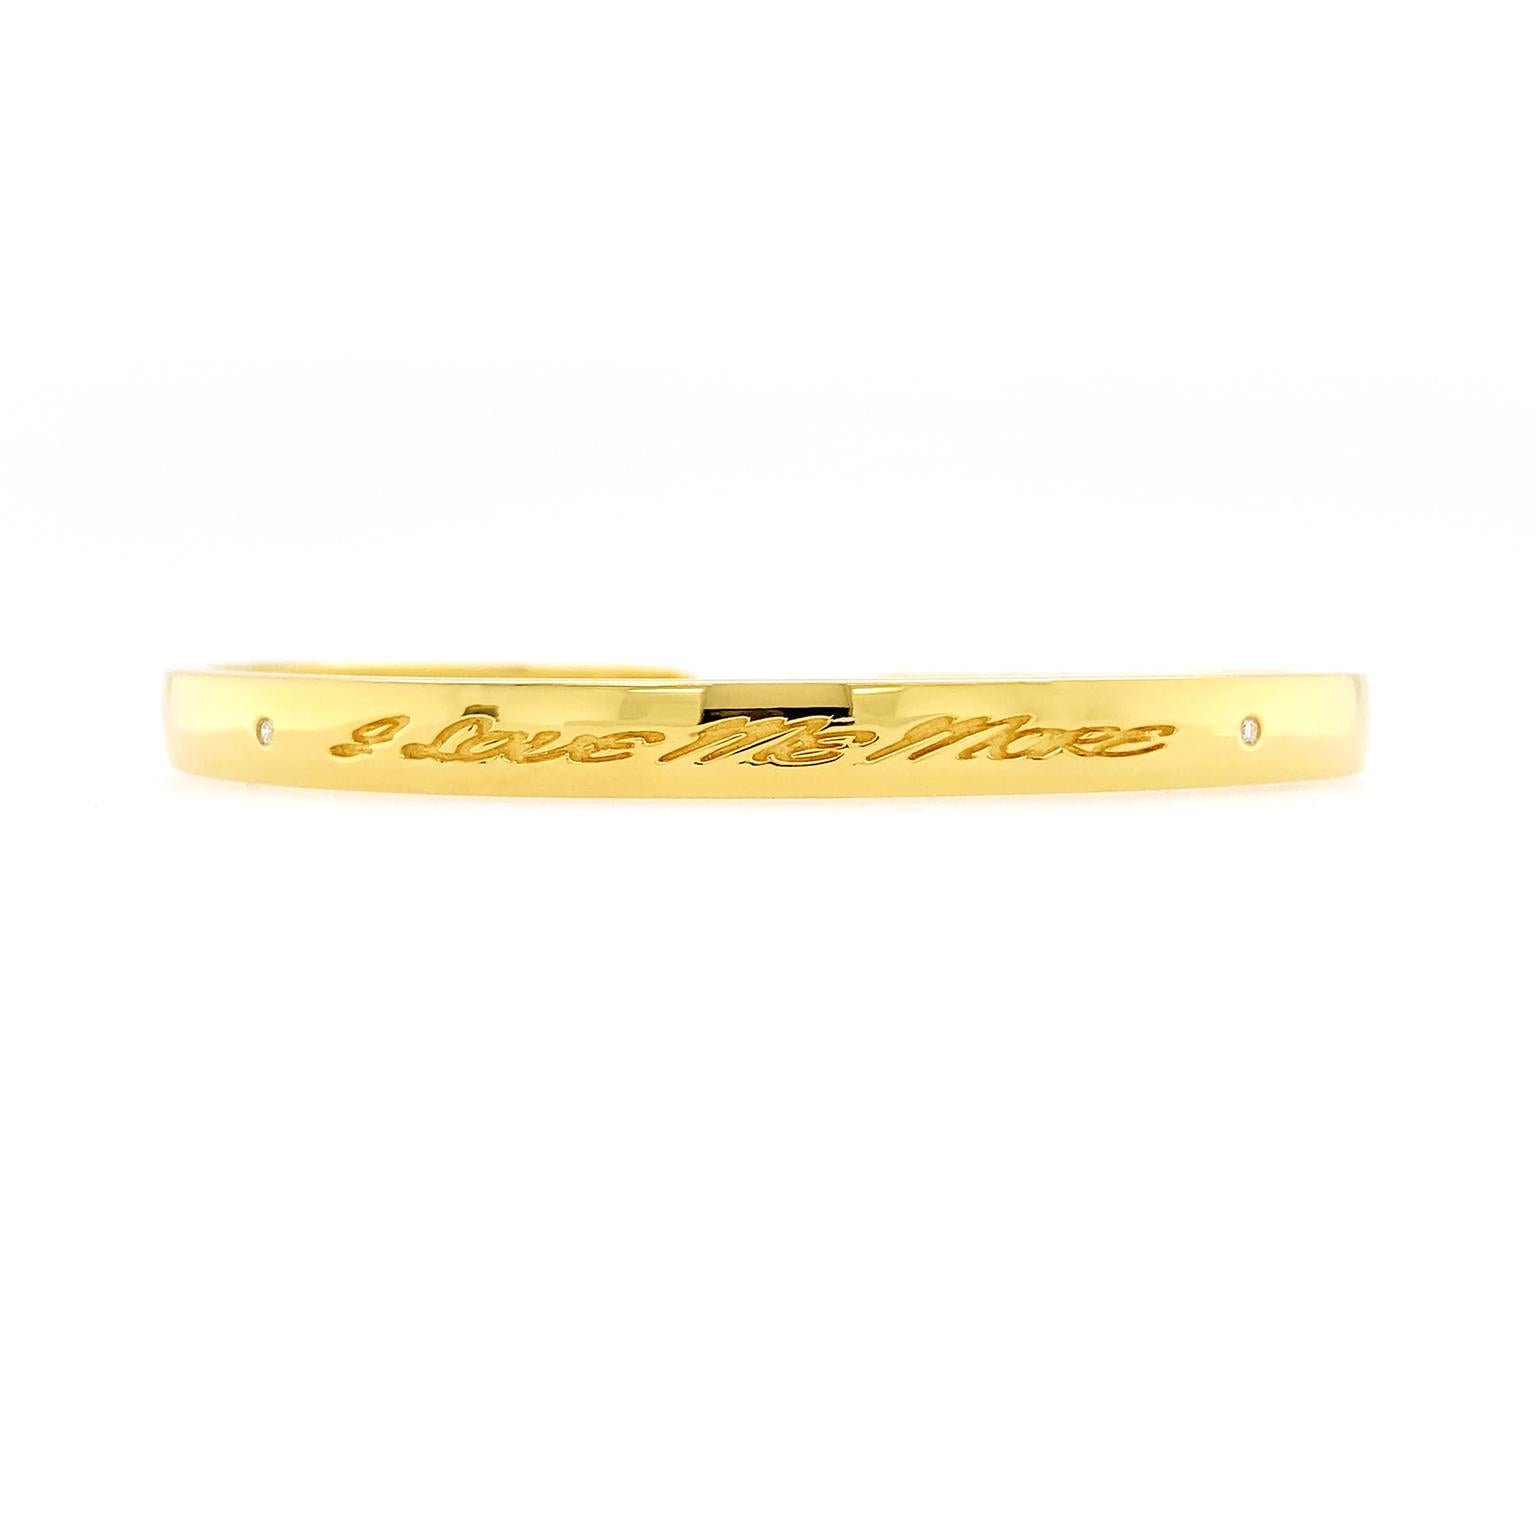 Brilliance underscores this bracelet’s romance. The body is a 5mm wide 18k yellow gold bangle with a flat surface and strong polish. It bears the engraved phrase 'I love me more.' Round brilliant cut diamonds rest on either side of the message,